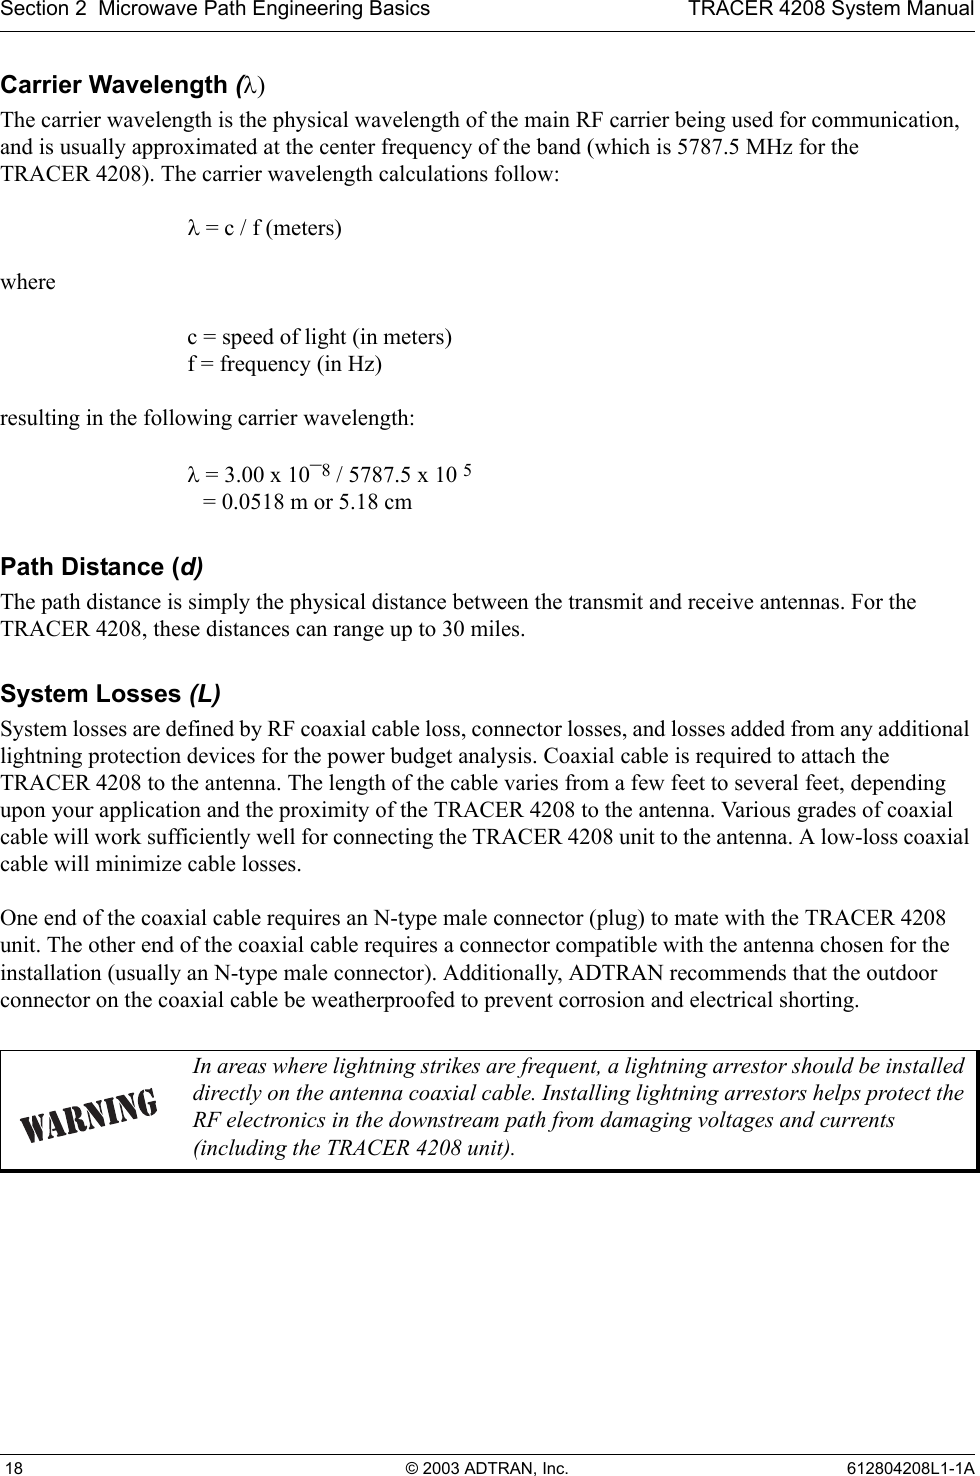 Section 2  Microwave Path Engineering Basics TRACER 4208 System Manual 18 © 2003 ADTRAN, Inc. 612804208L1-1ACarrier Wavelength (λ)The carrier wavelength is the physical wavelength of the main RF carrier being used for communication, and is usually approximated at the center frequency of the band (which is 5787.5 MHz for the TRACER 4208). The carrier wavelength calculations follow:λ = c / f (meters)where c = speed of light (in meters)f = frequency (in Hz)resulting in the following carrier wavelength:λ = 3.00 x 10¯8 / 5787.5 x 10 5 = 0.0518 m or 5.18 cmPath Distance (d)The path distance is simply the physical distance between the transmit and receive antennas. For the TRACER 4208, these distances can range up to 30 miles. System Losses (L)System losses are defined by RF coaxial cable loss, connector losses, and losses added from any additional lightning protection devices for the power budget analysis. Coaxial cable is required to attach the TRACER 4208 to the antenna. The length of the cable varies from a few feet to several feet, depending upon your application and the proximity of the TRACER 4208 to the antenna. Various grades of coaxial cable will work sufficiently well for connecting the TRACER 4208 unit to the antenna. A low-loss coaxial cable will minimize cable losses.One end of the coaxial cable requires an N-type male connector (plug) to mate with the TRACER 4208 unit. The other end of the coaxial cable requires a connector compatible with the antenna chosen for the installation (usually an N-type male connector). Additionally, ADTRAN recommends that the outdoor connector on the coaxial cable be weatherproofed to prevent corrosion and electrical shorting.In areas where lightning strikes are frequent, a lightning arrestor should be installed directly on the antenna coaxial cable. Installing lightning arrestors helps protect the RF electronics in the downstream path from damaging voltages and currents (including the TRACER 4208 unit).